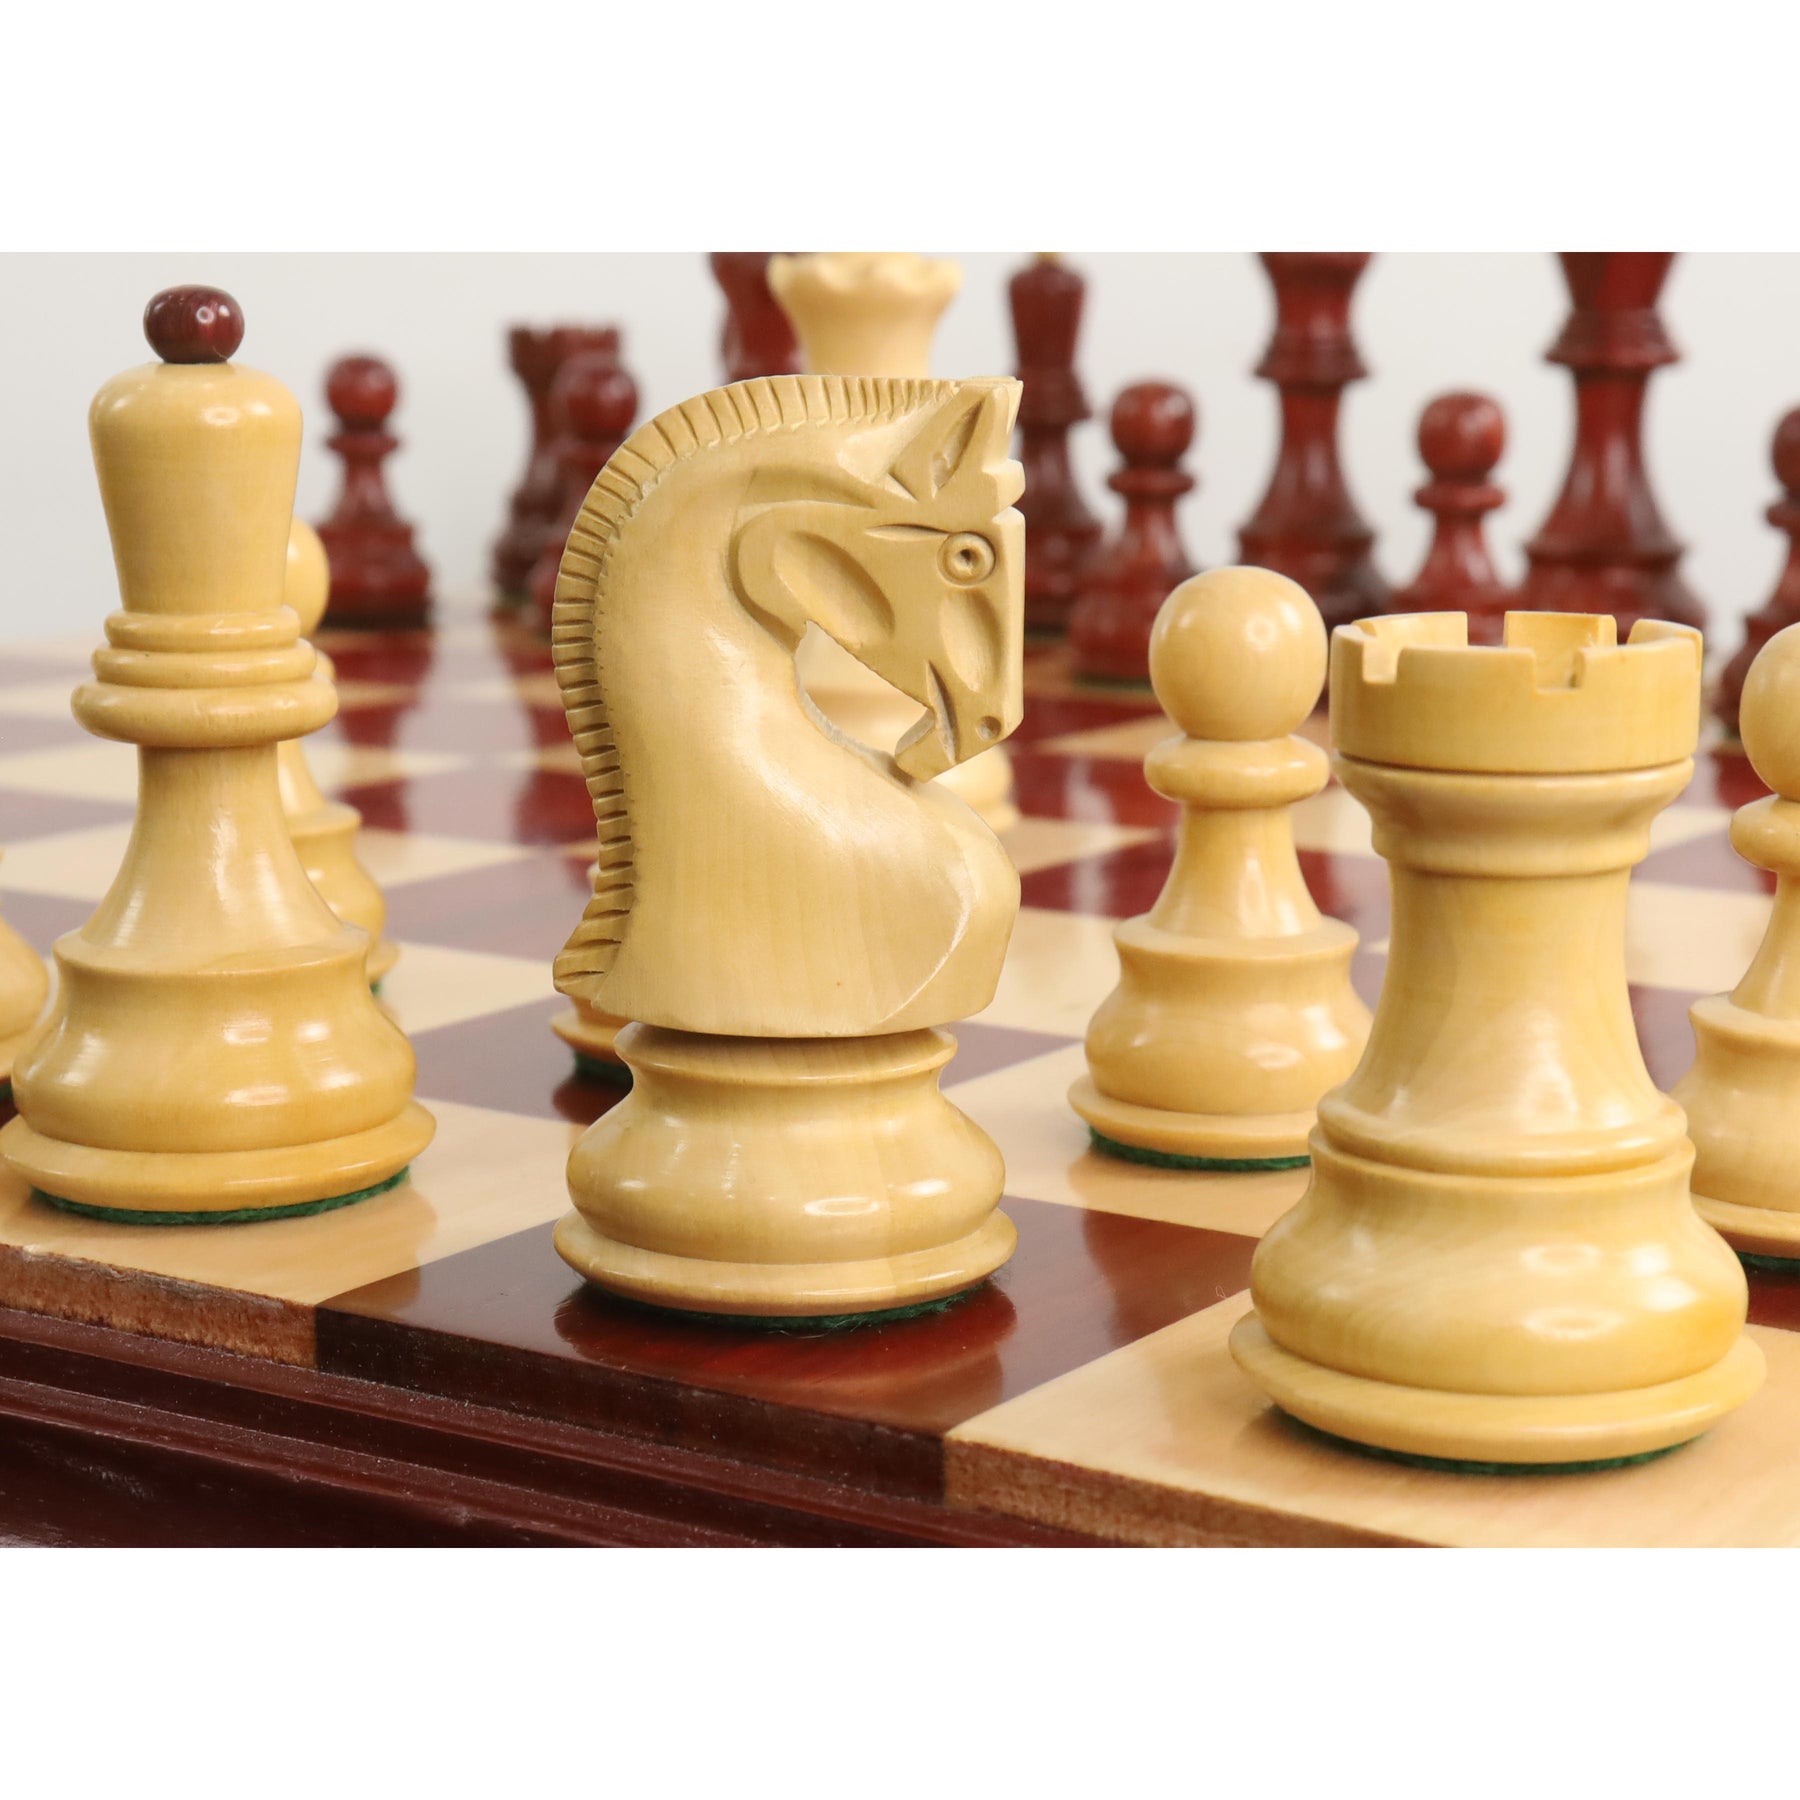 3.9 Russian Zagreb Triple Weighted Chess Pieces Only Set